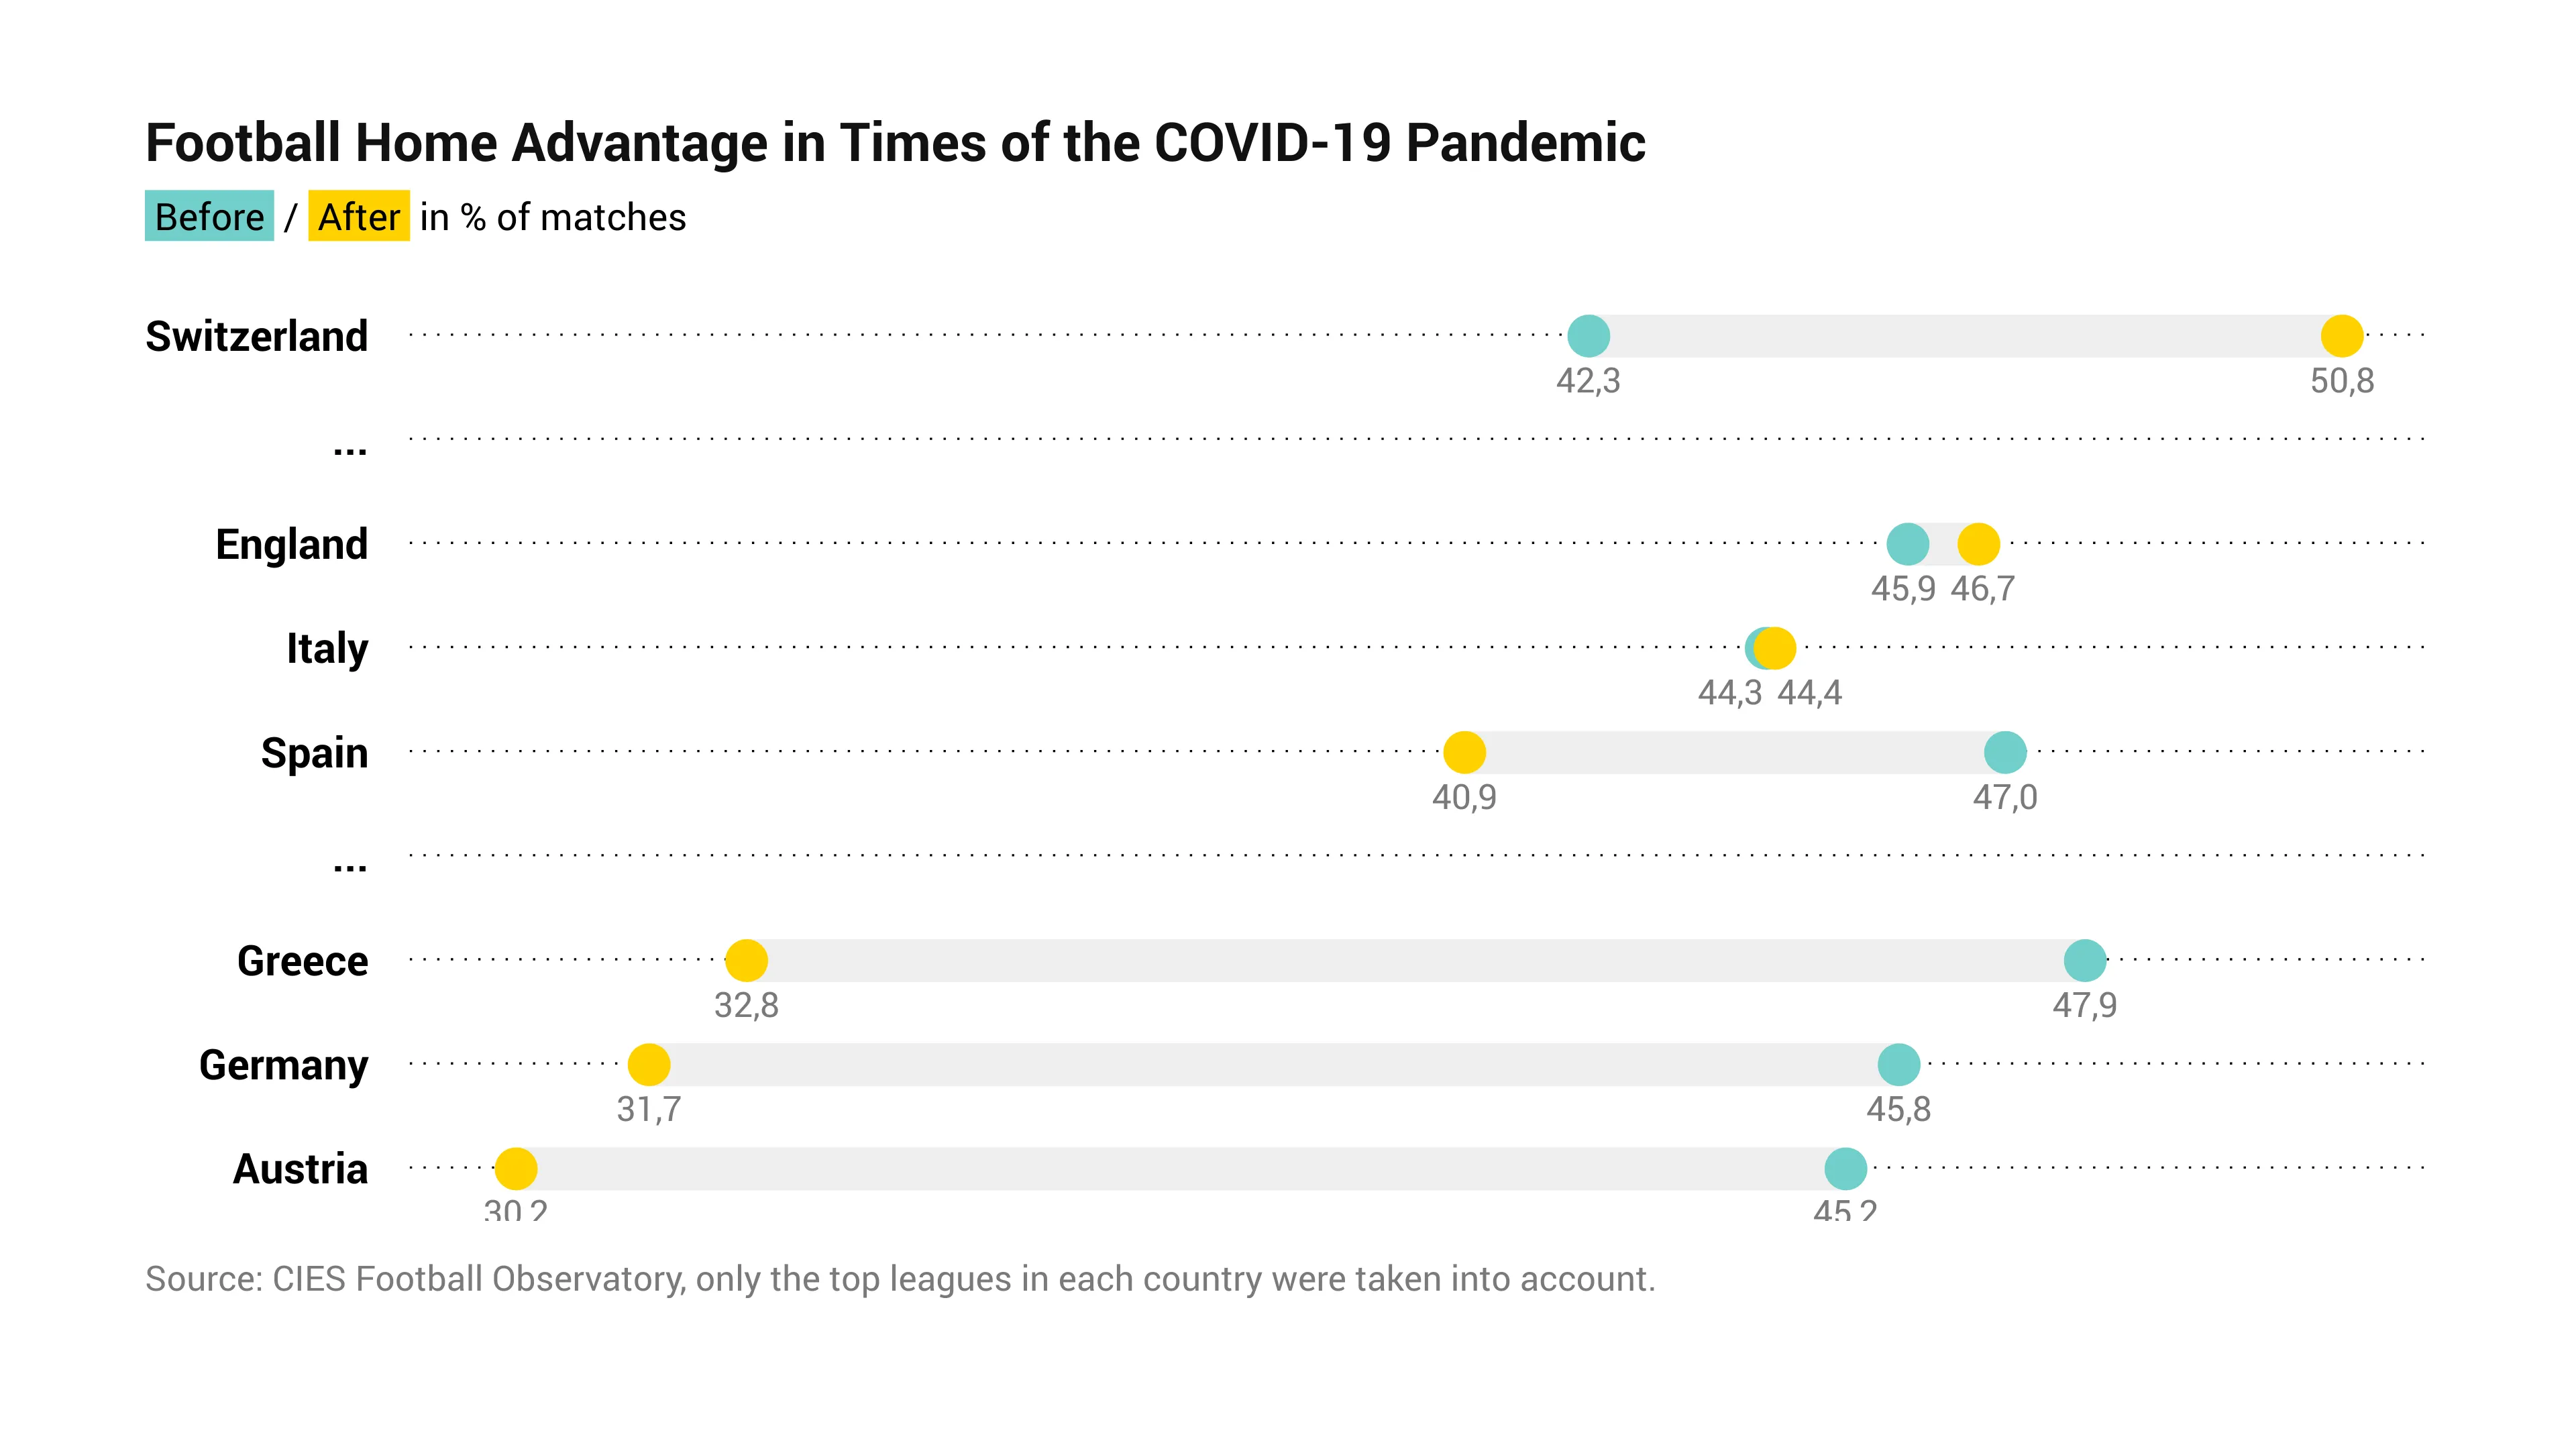 Football Home Advantage in Times of the COVID-19 Pandemic